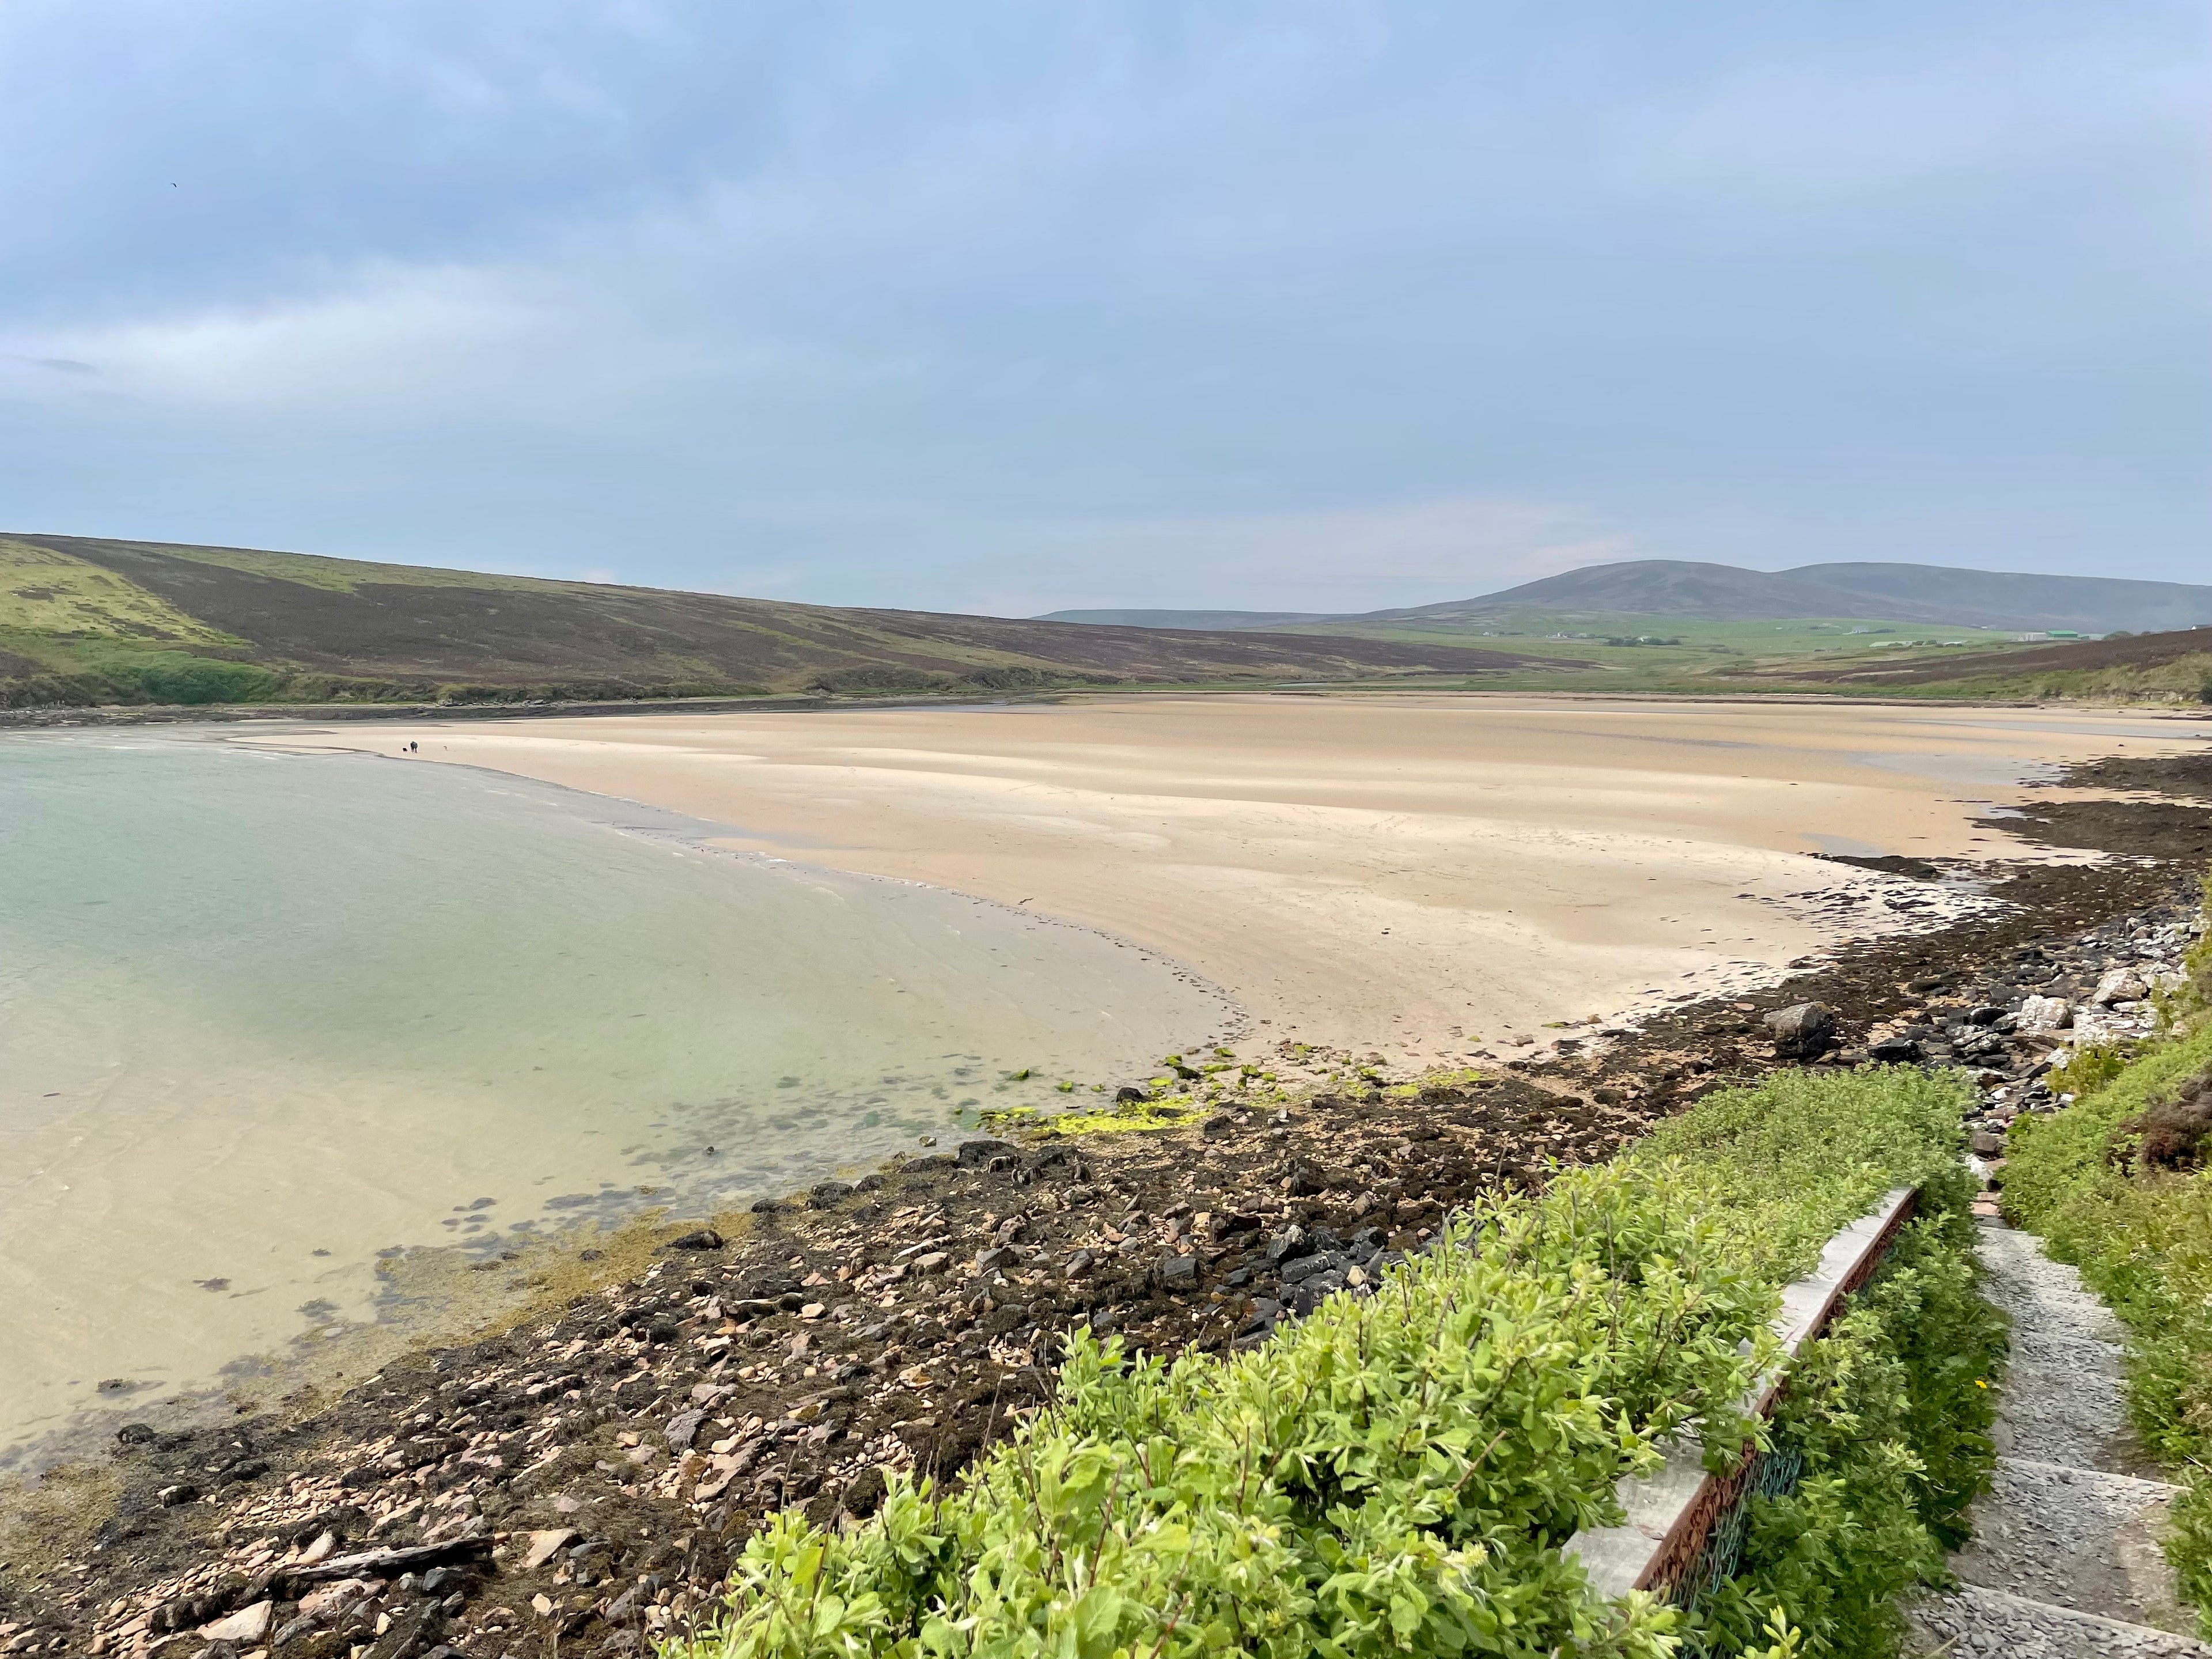 Looking out toward the beach at Waulkmill Bay in Orkney, Scotland